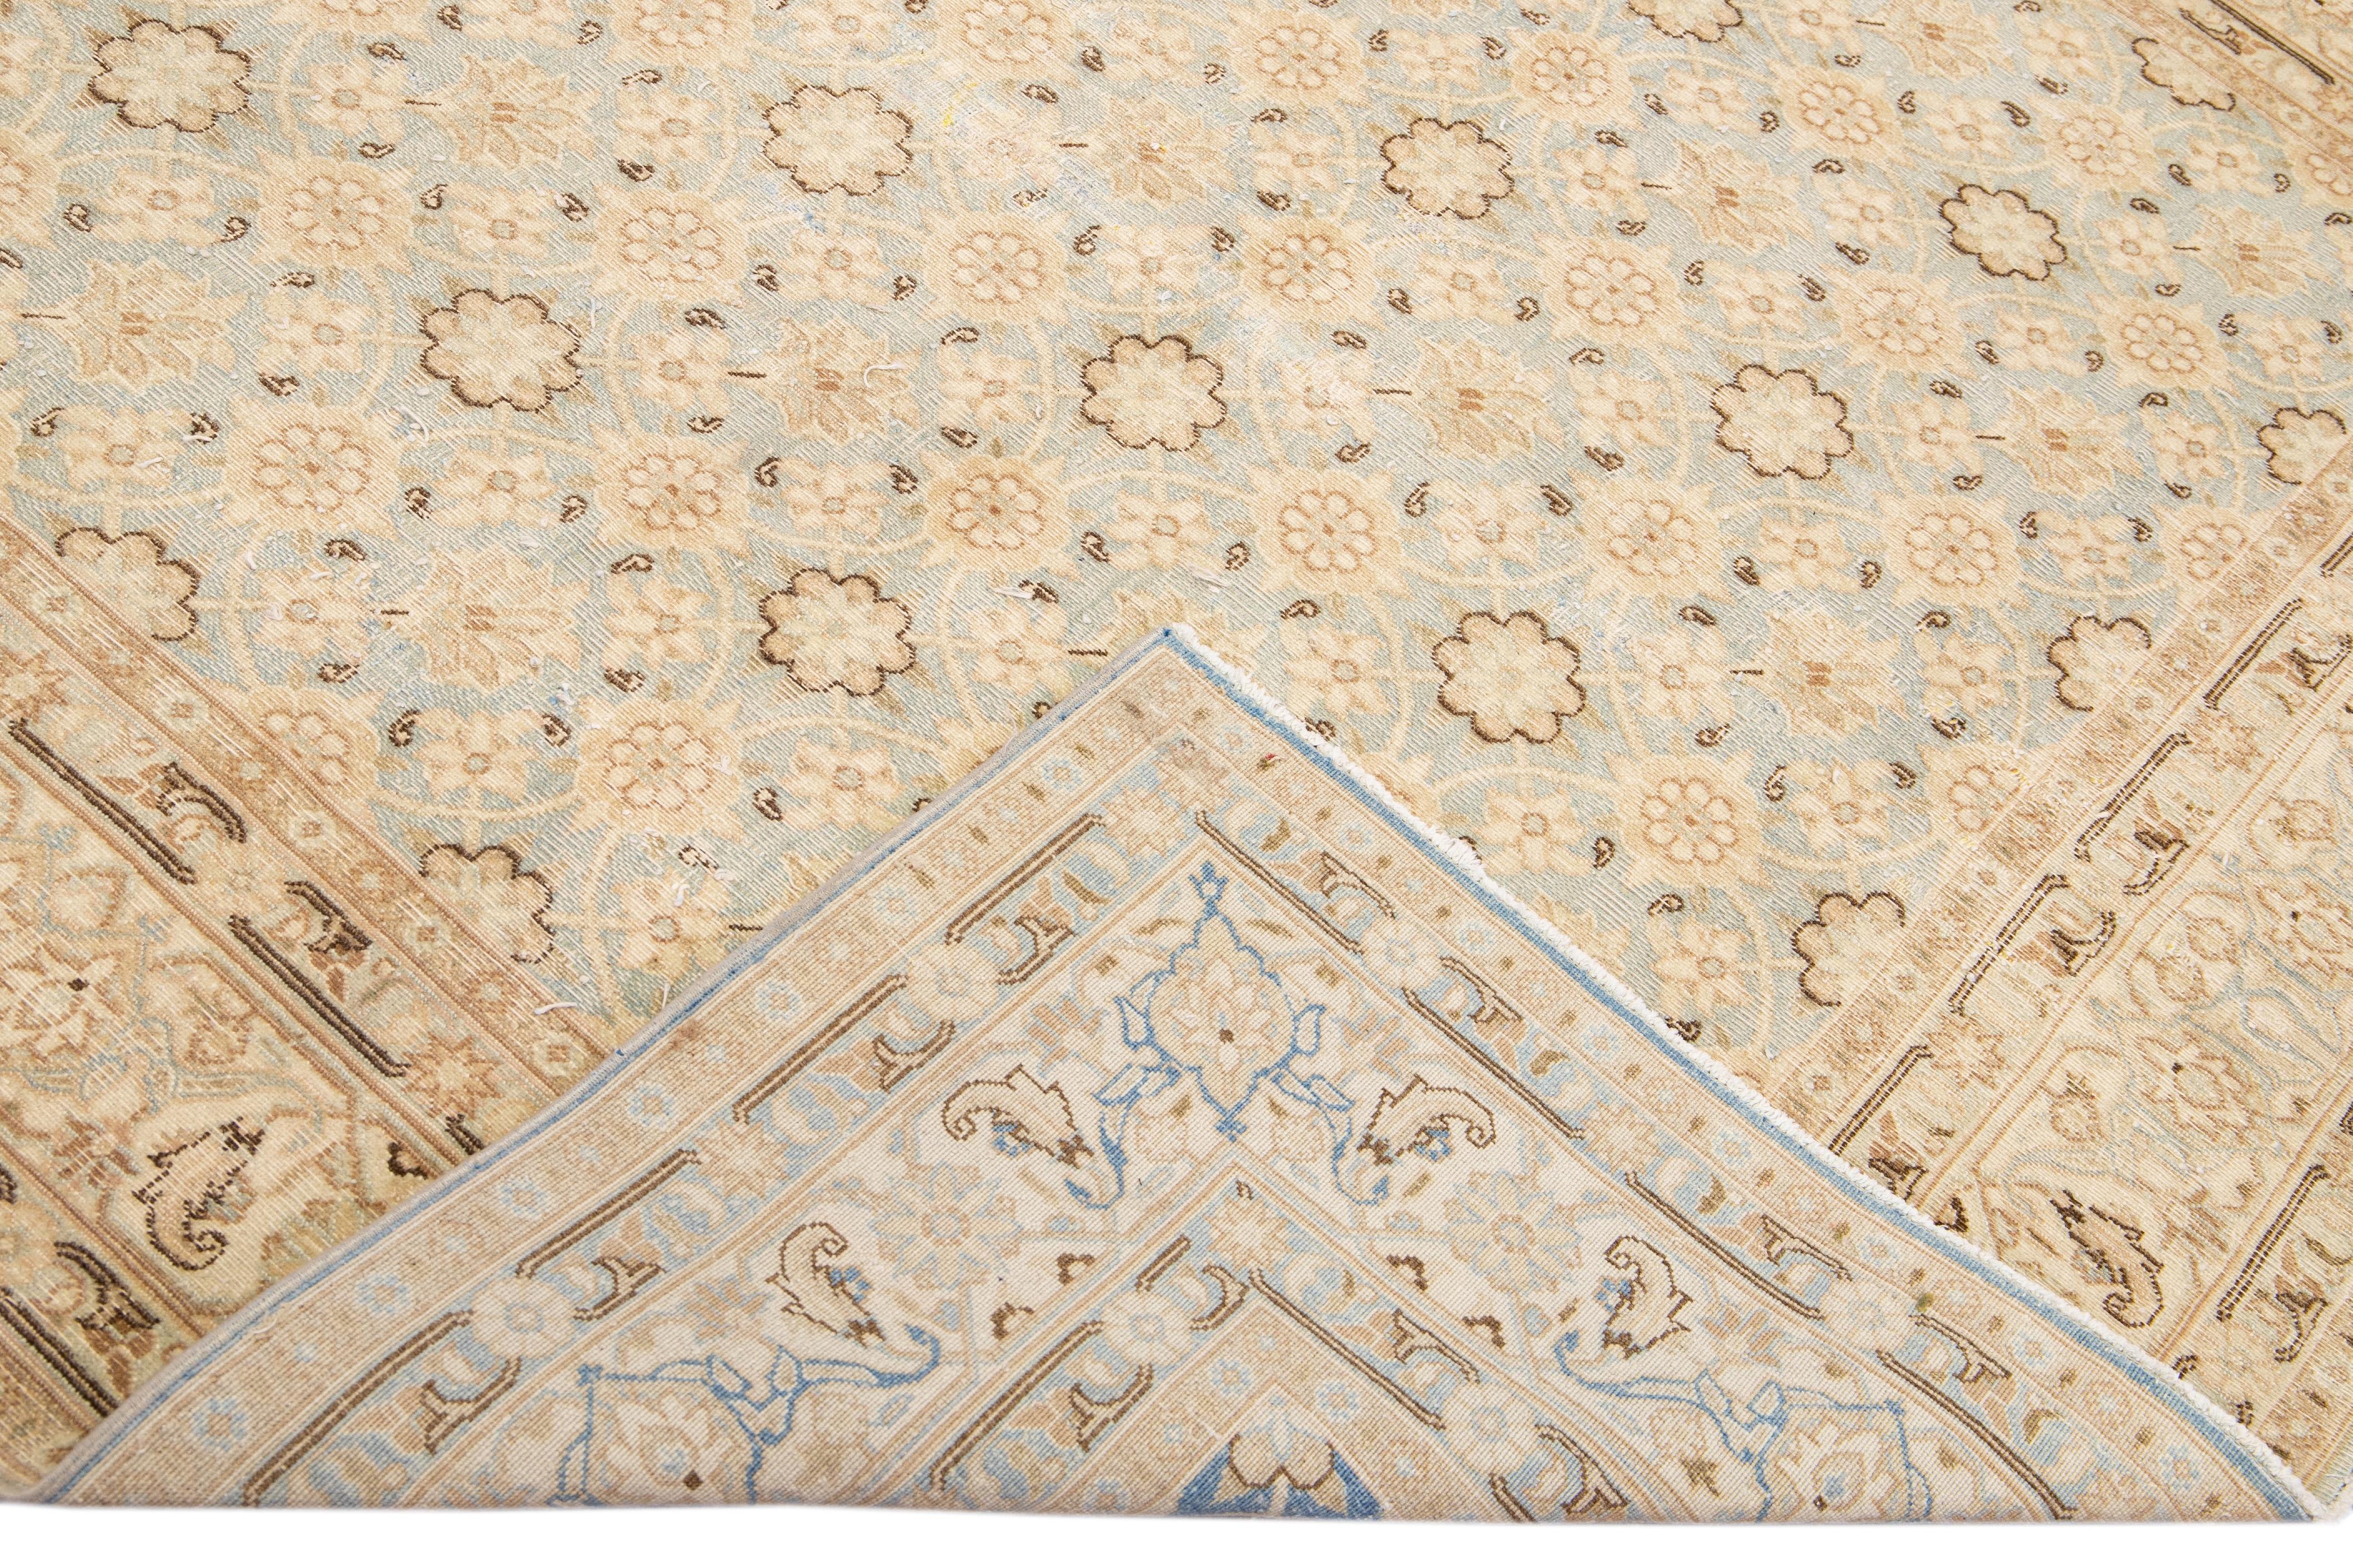 Beautiful antique Persian Tabriz hand-knotted wool rug with a blue field. This piece has a beige accent in an all-over gorgeous floral design.

This rug measures: 6'6